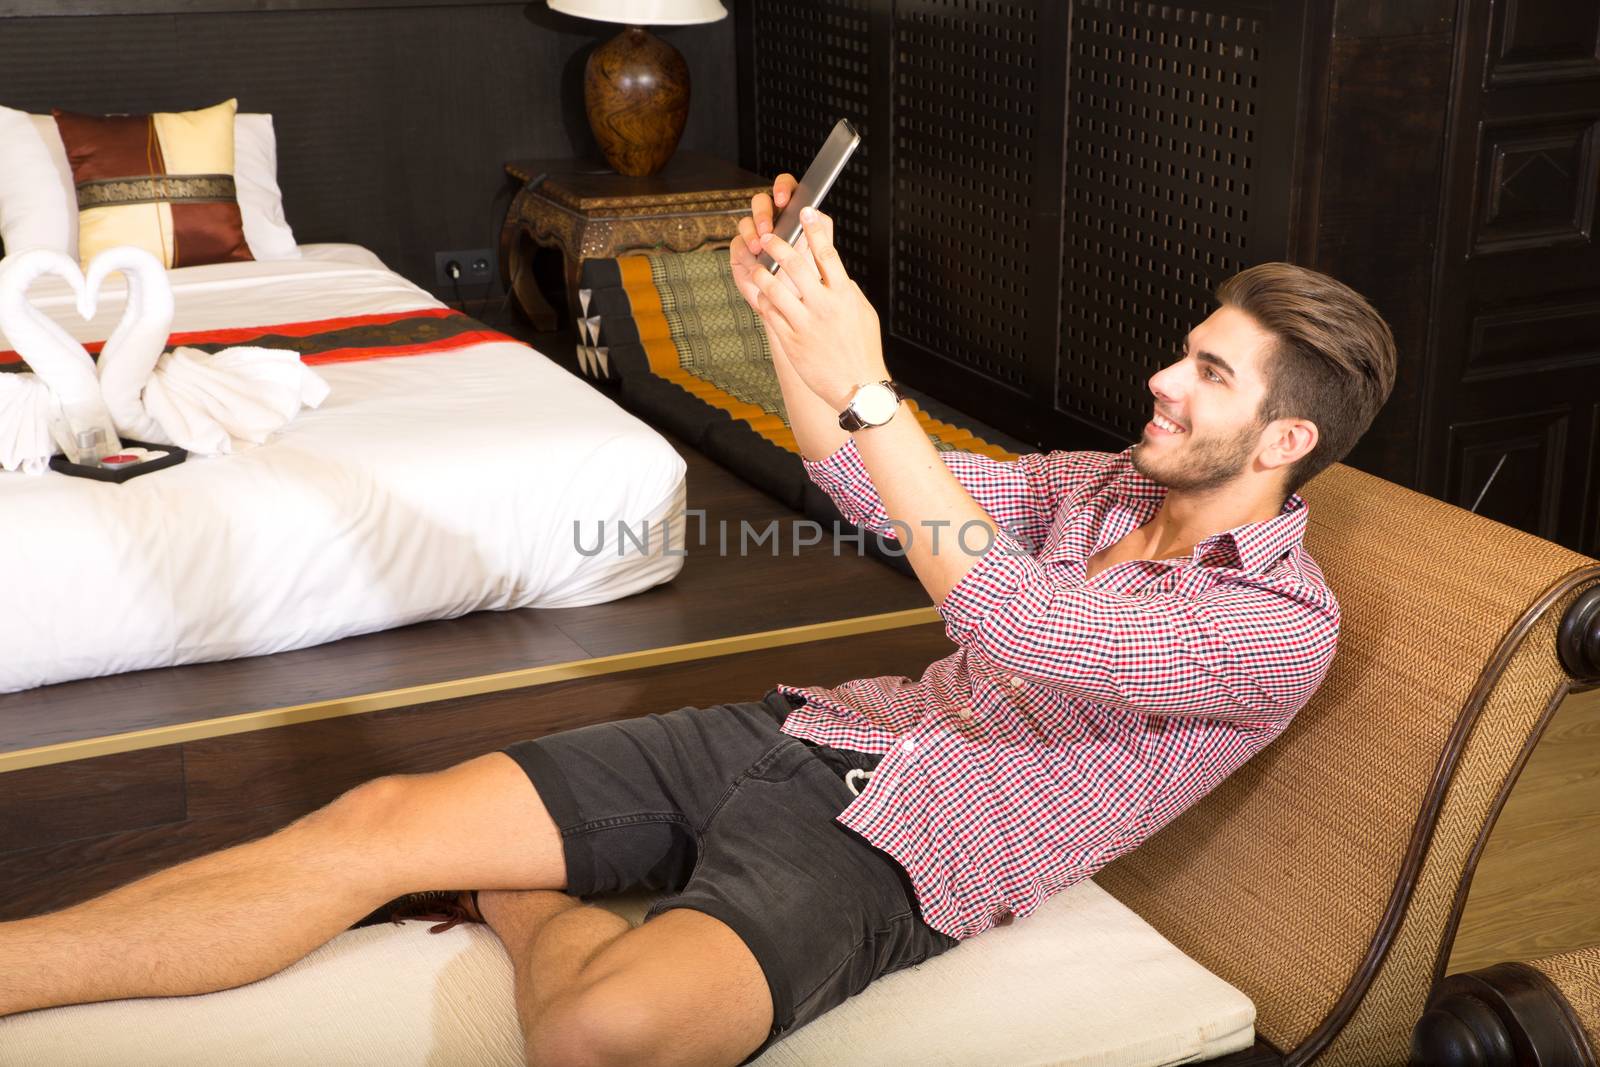 Young man in a hotel room taking a selfie		 by Spectral